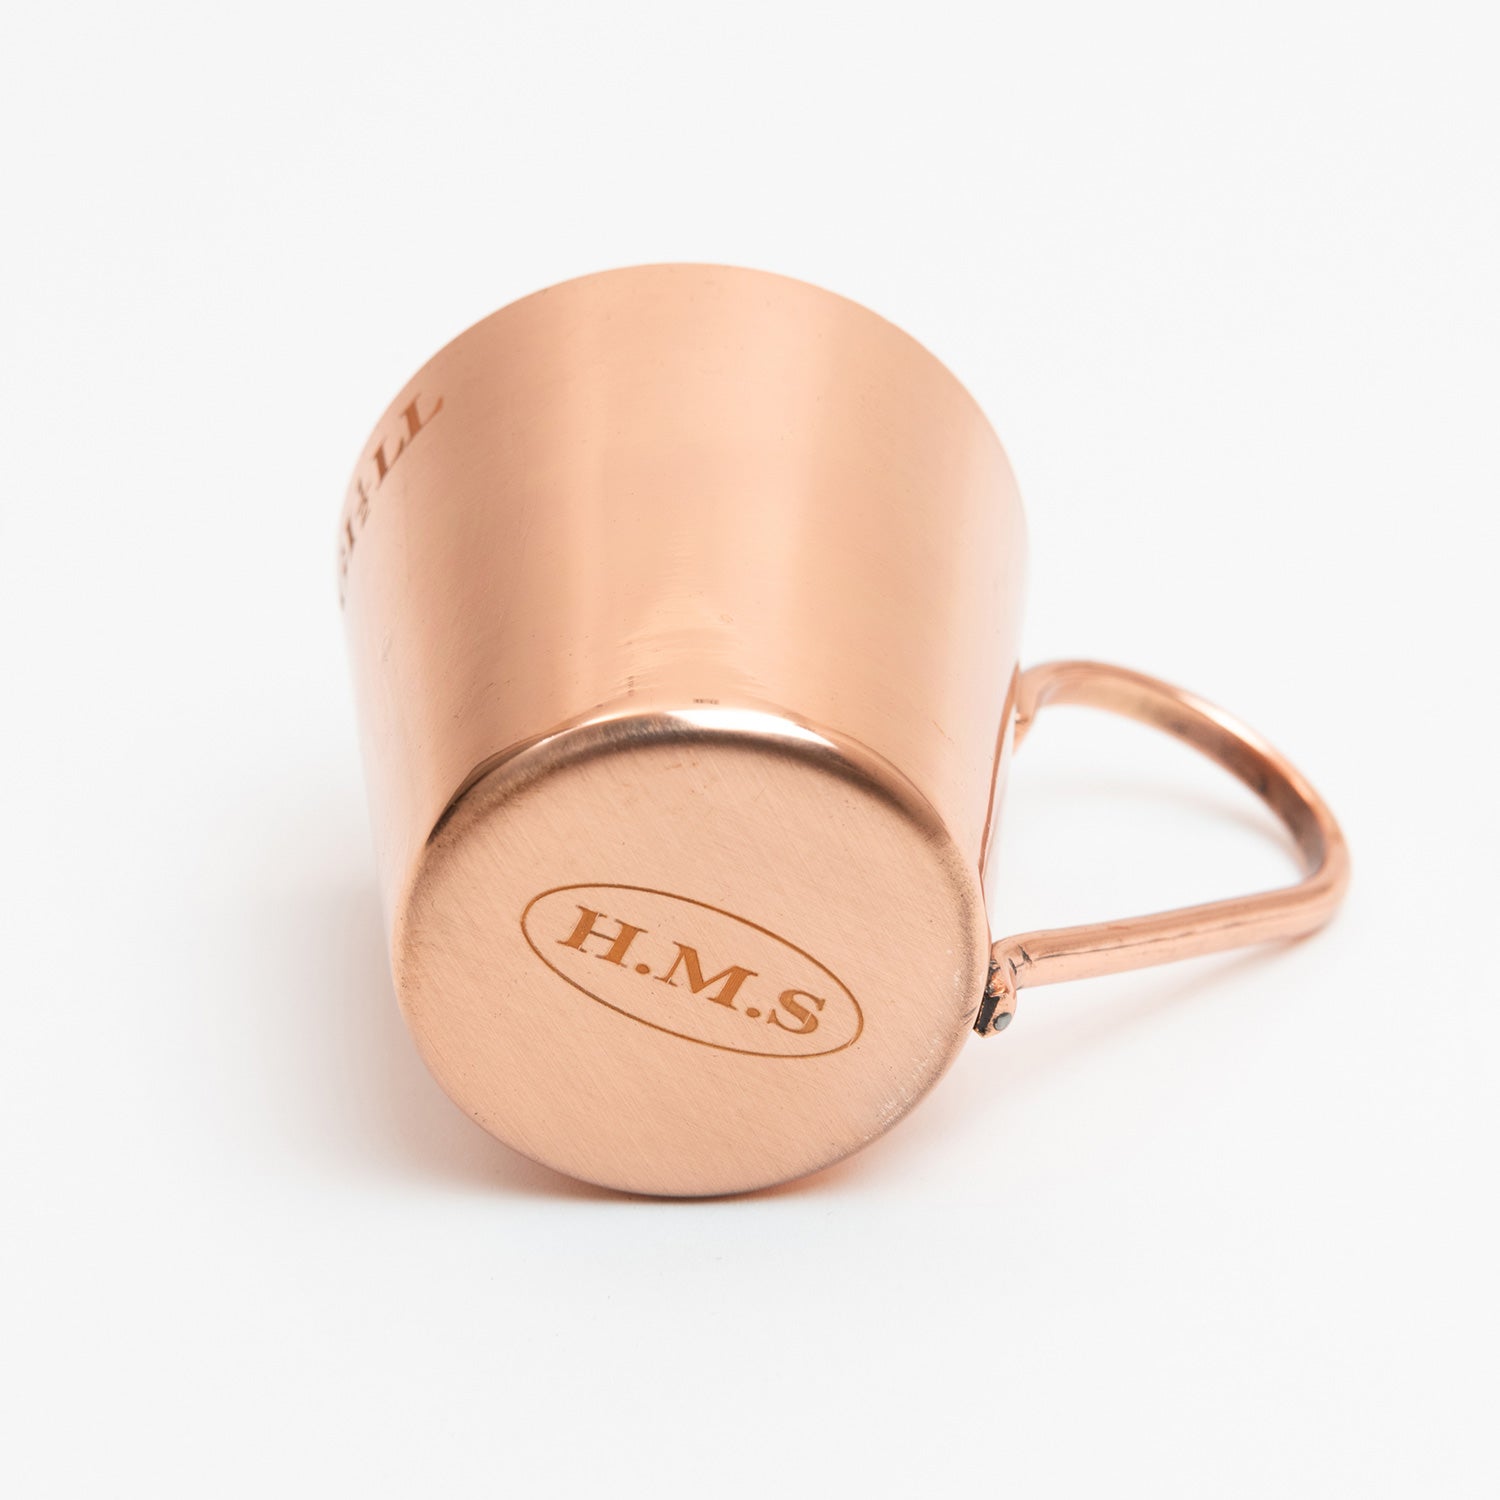 A copper-plated naval rum measure, cup with handle. Pictured on a white background.